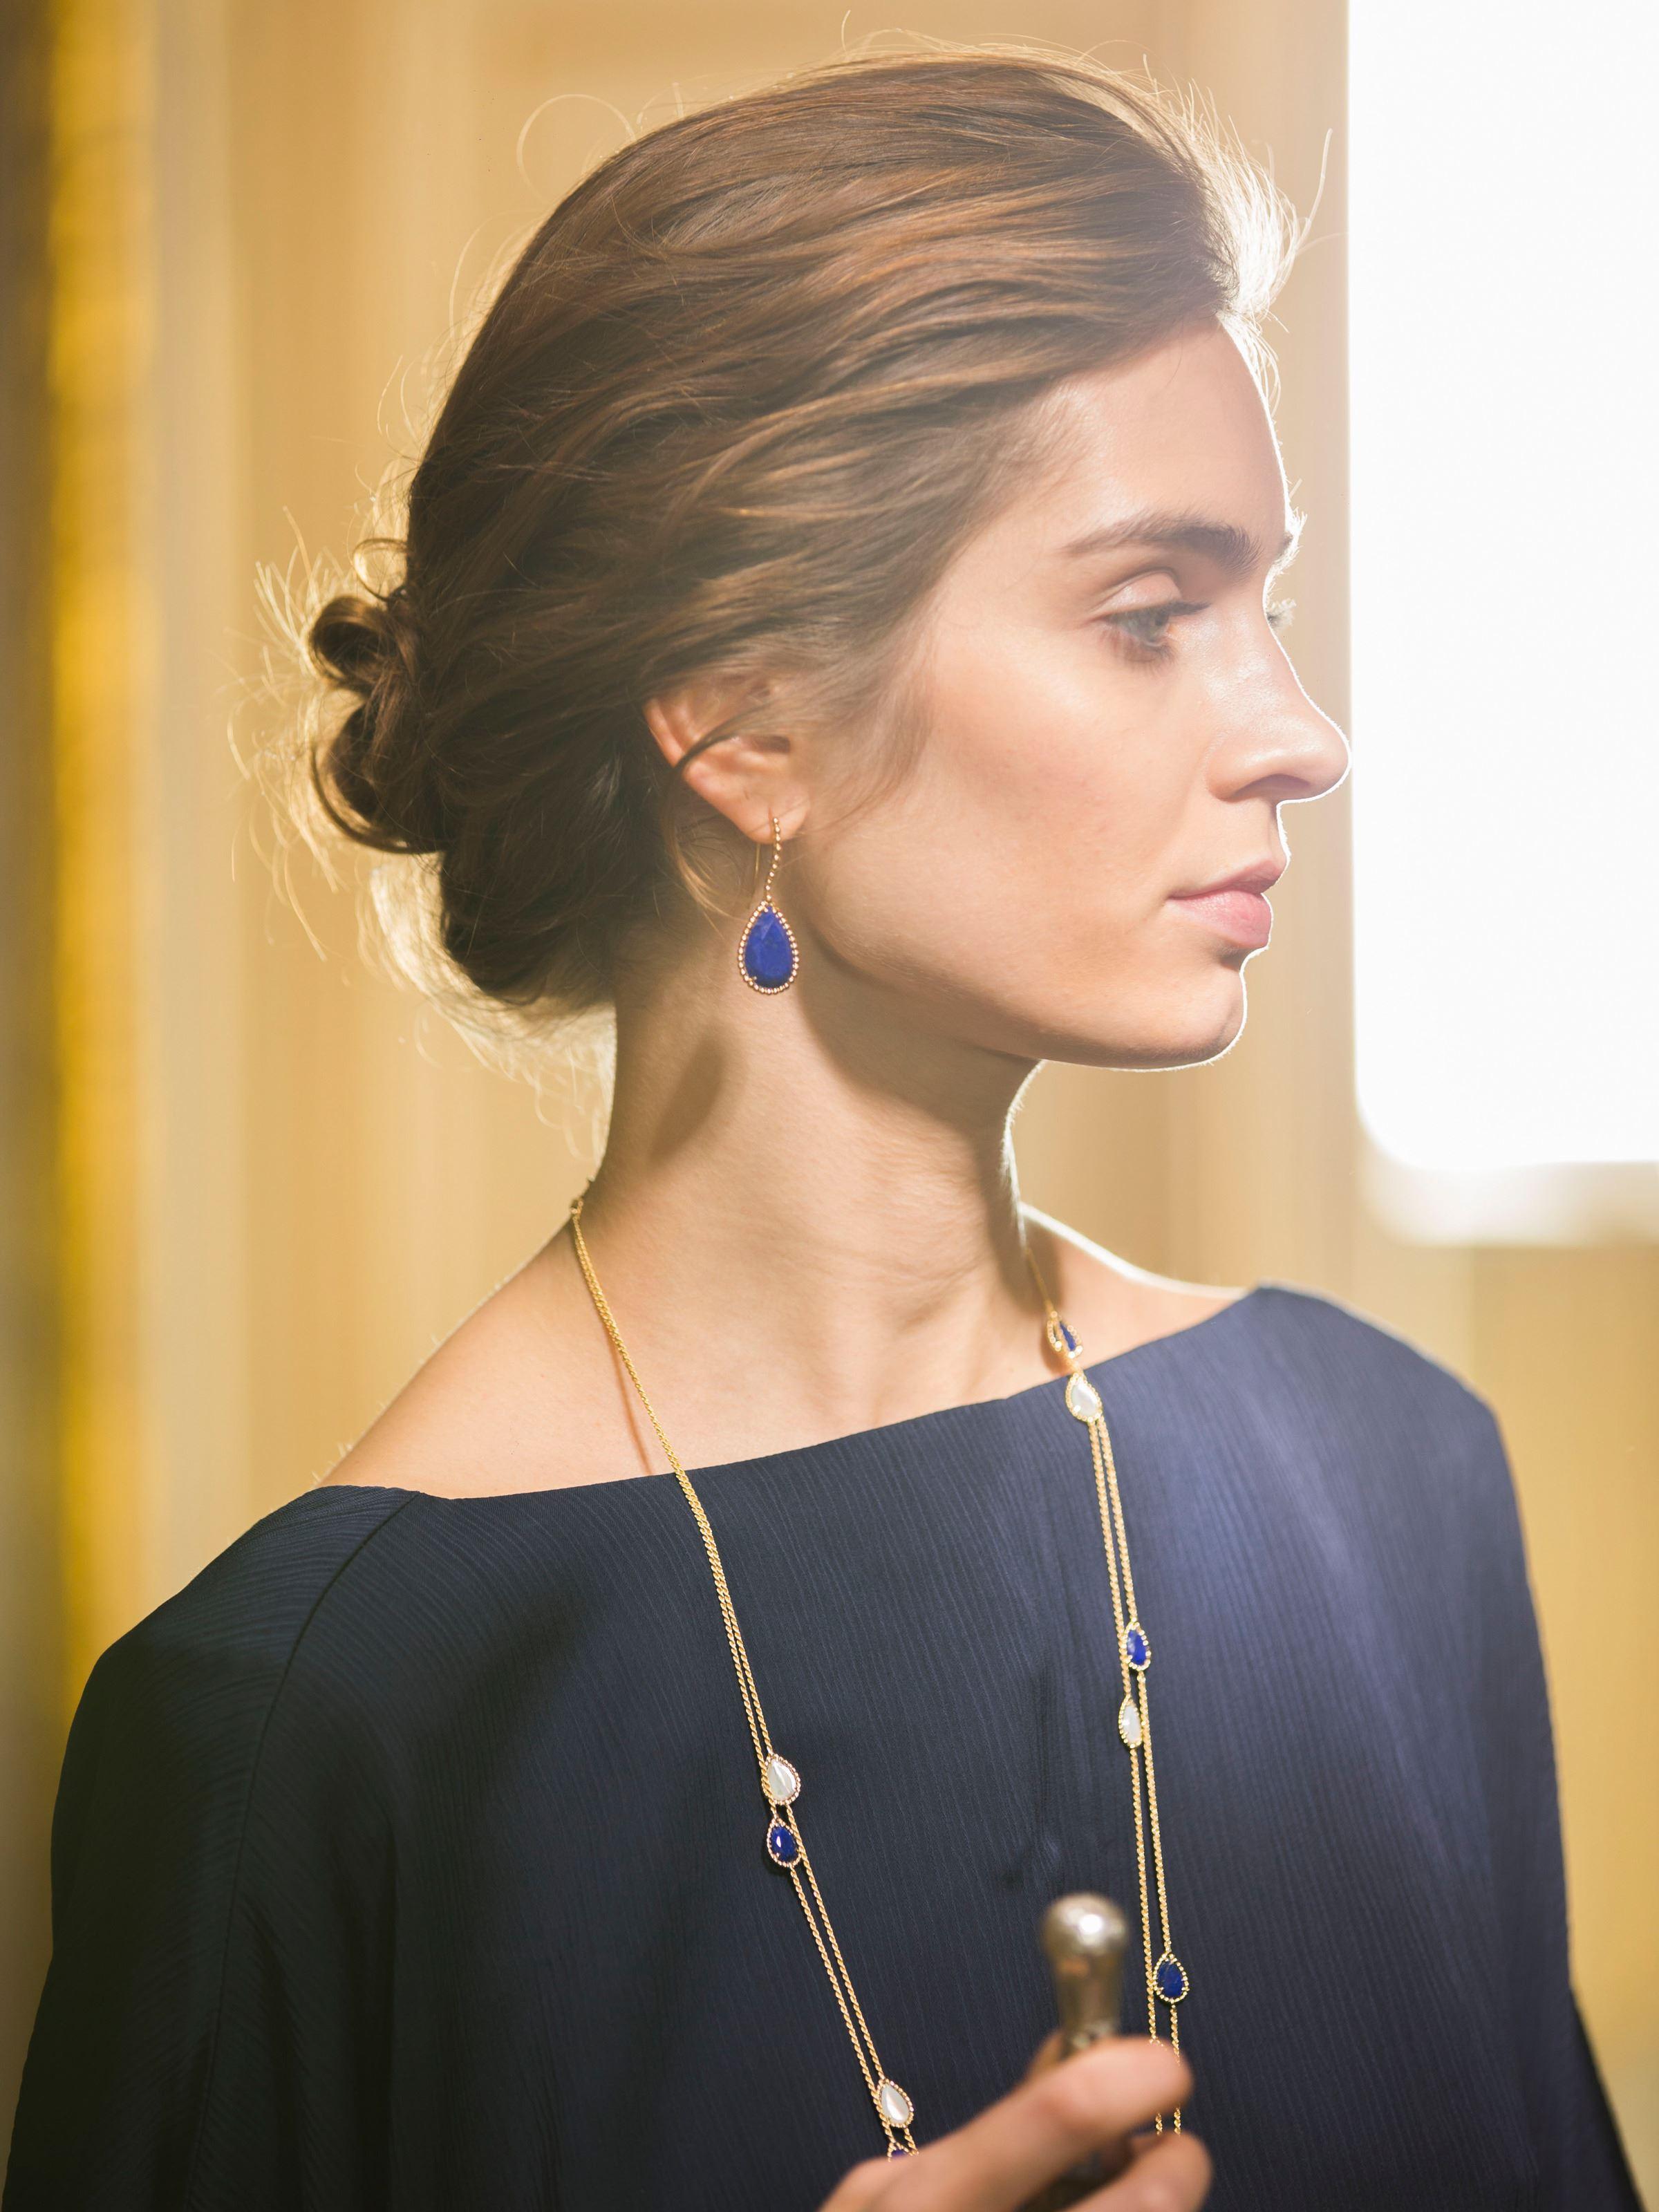 Boucheron yellow gold necklace with lapis lazuli from the Serpent Boheme Collection.
 
Signed Boucheron necklace in 18 karat yellow gold featuring 6 lapis lazuli Drop Motifs bordered by gold beads with finesse, a jewellery work specific to